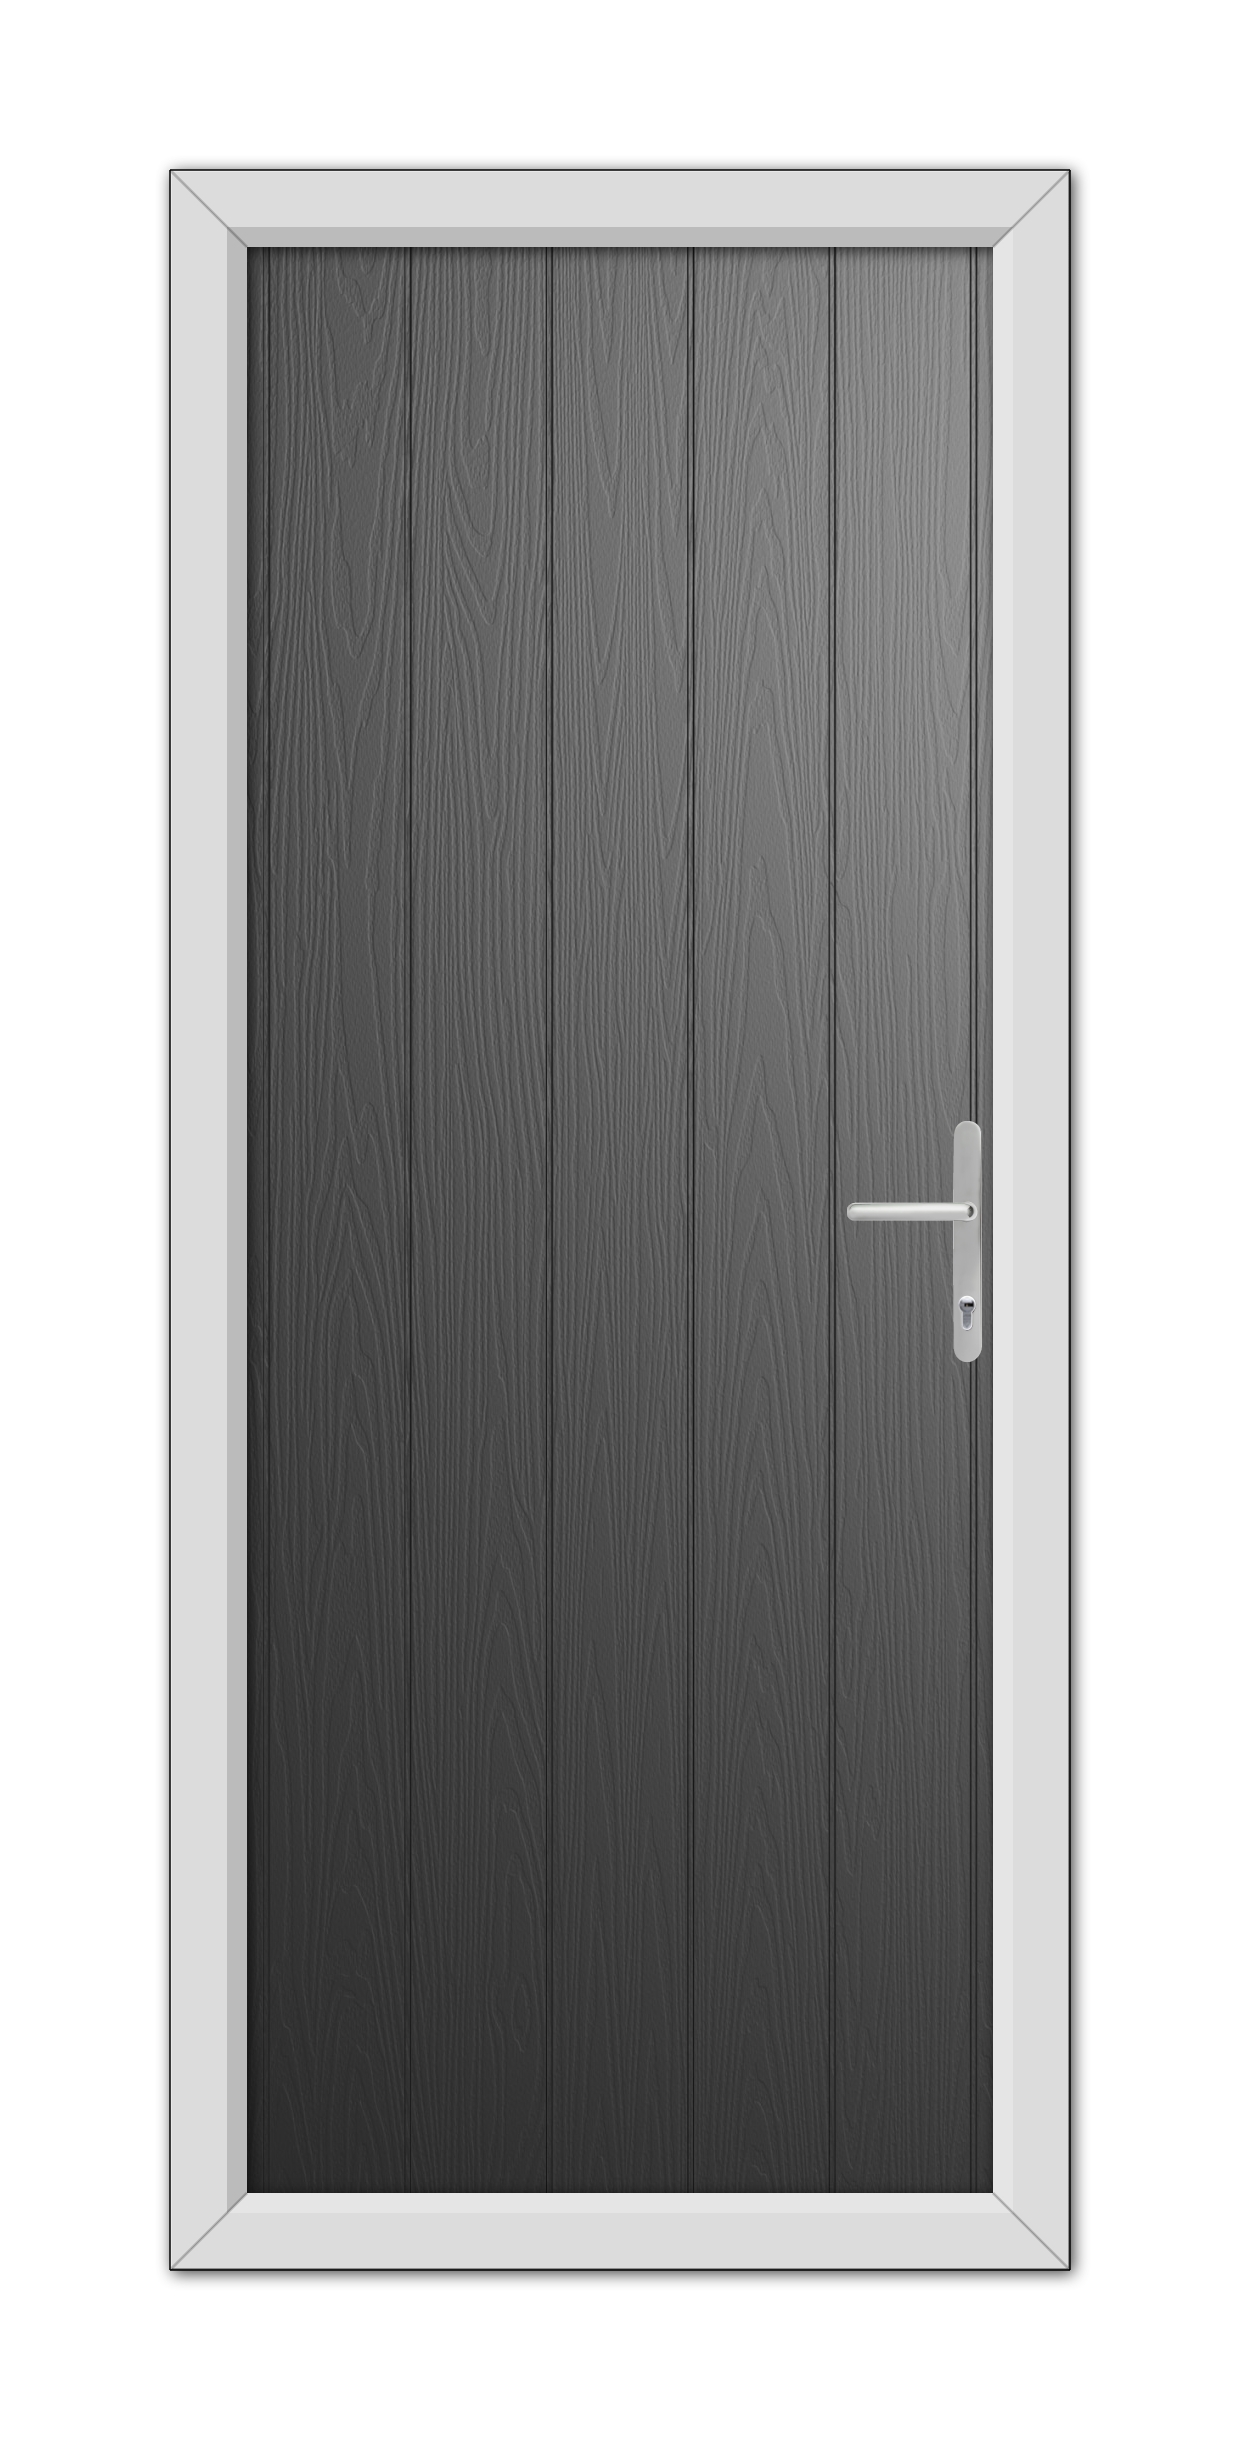 A modern closed Black Norfolk Solid Composite Door 48mm Timber Core with a silver handle, set within a light gray frame.